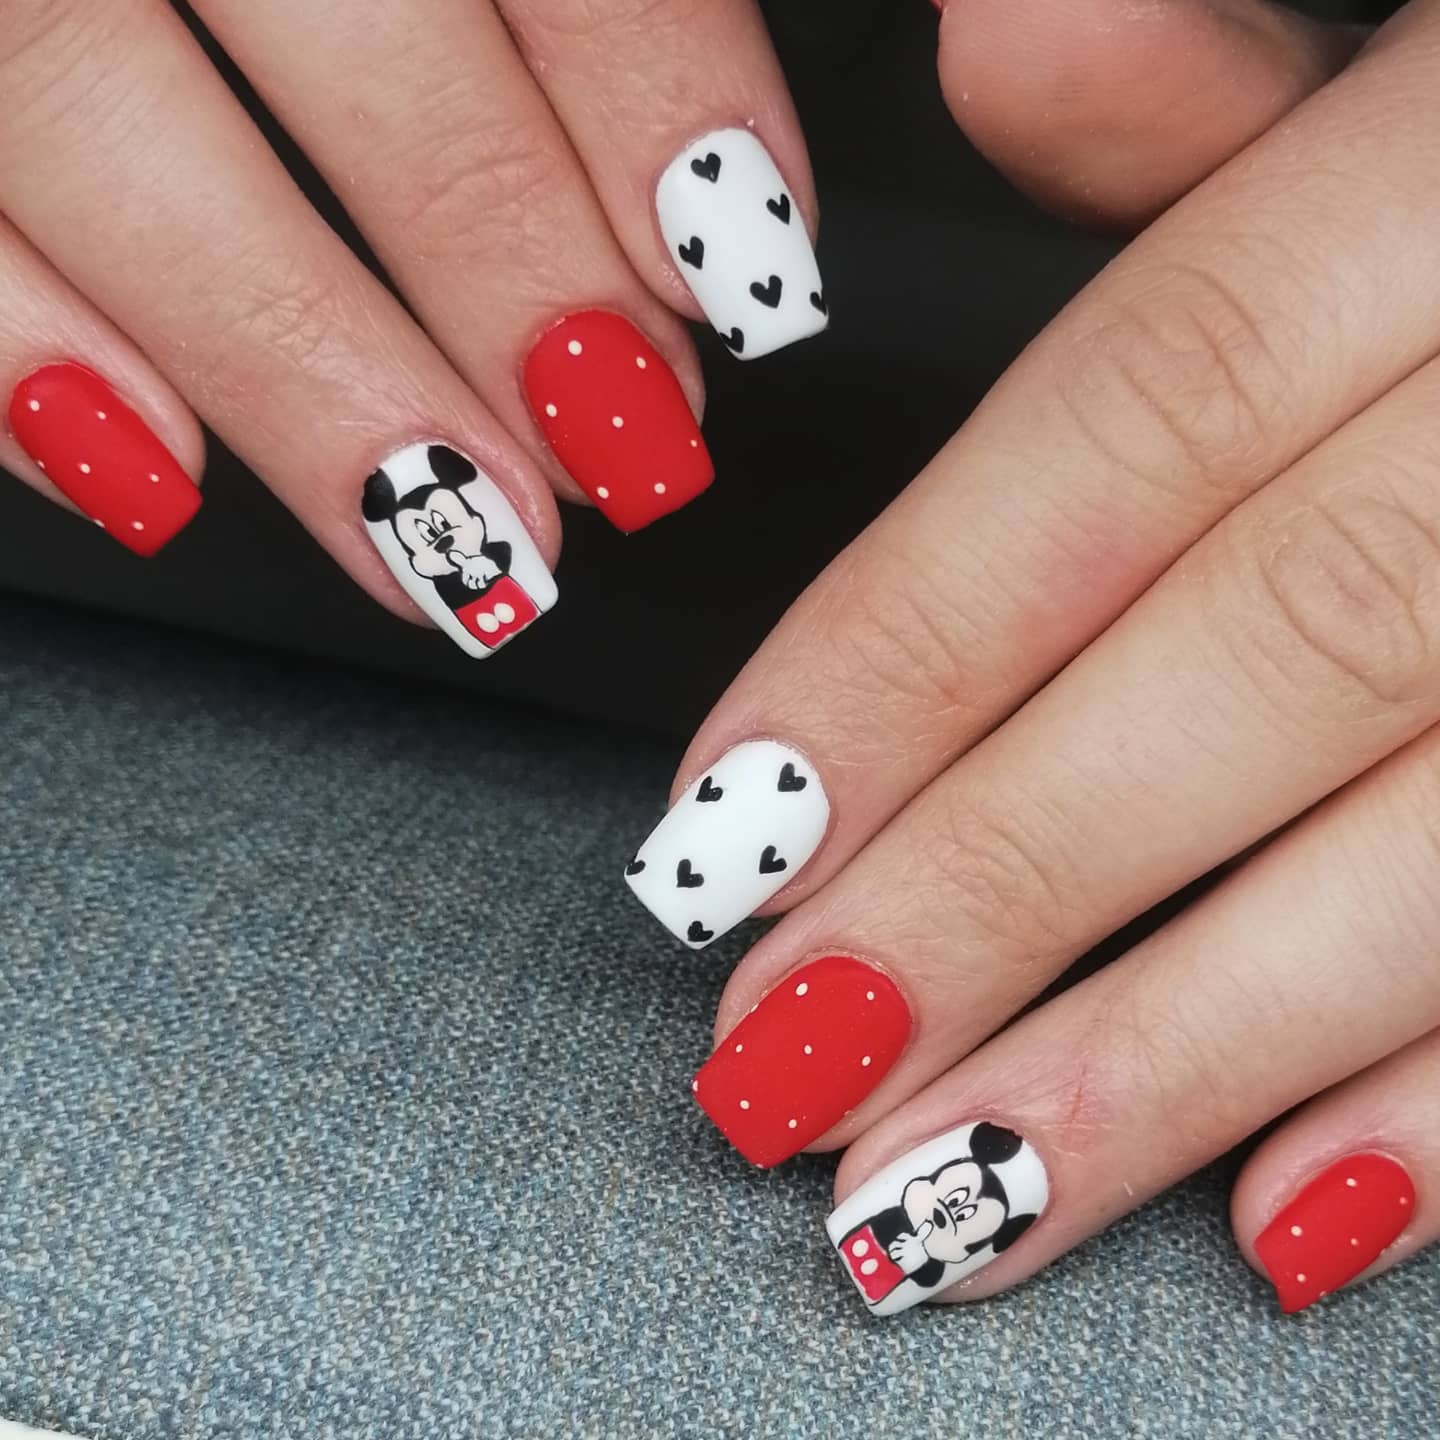 50+ Magical Disney Nails To Give You Inspiration! - Prada & Pearls